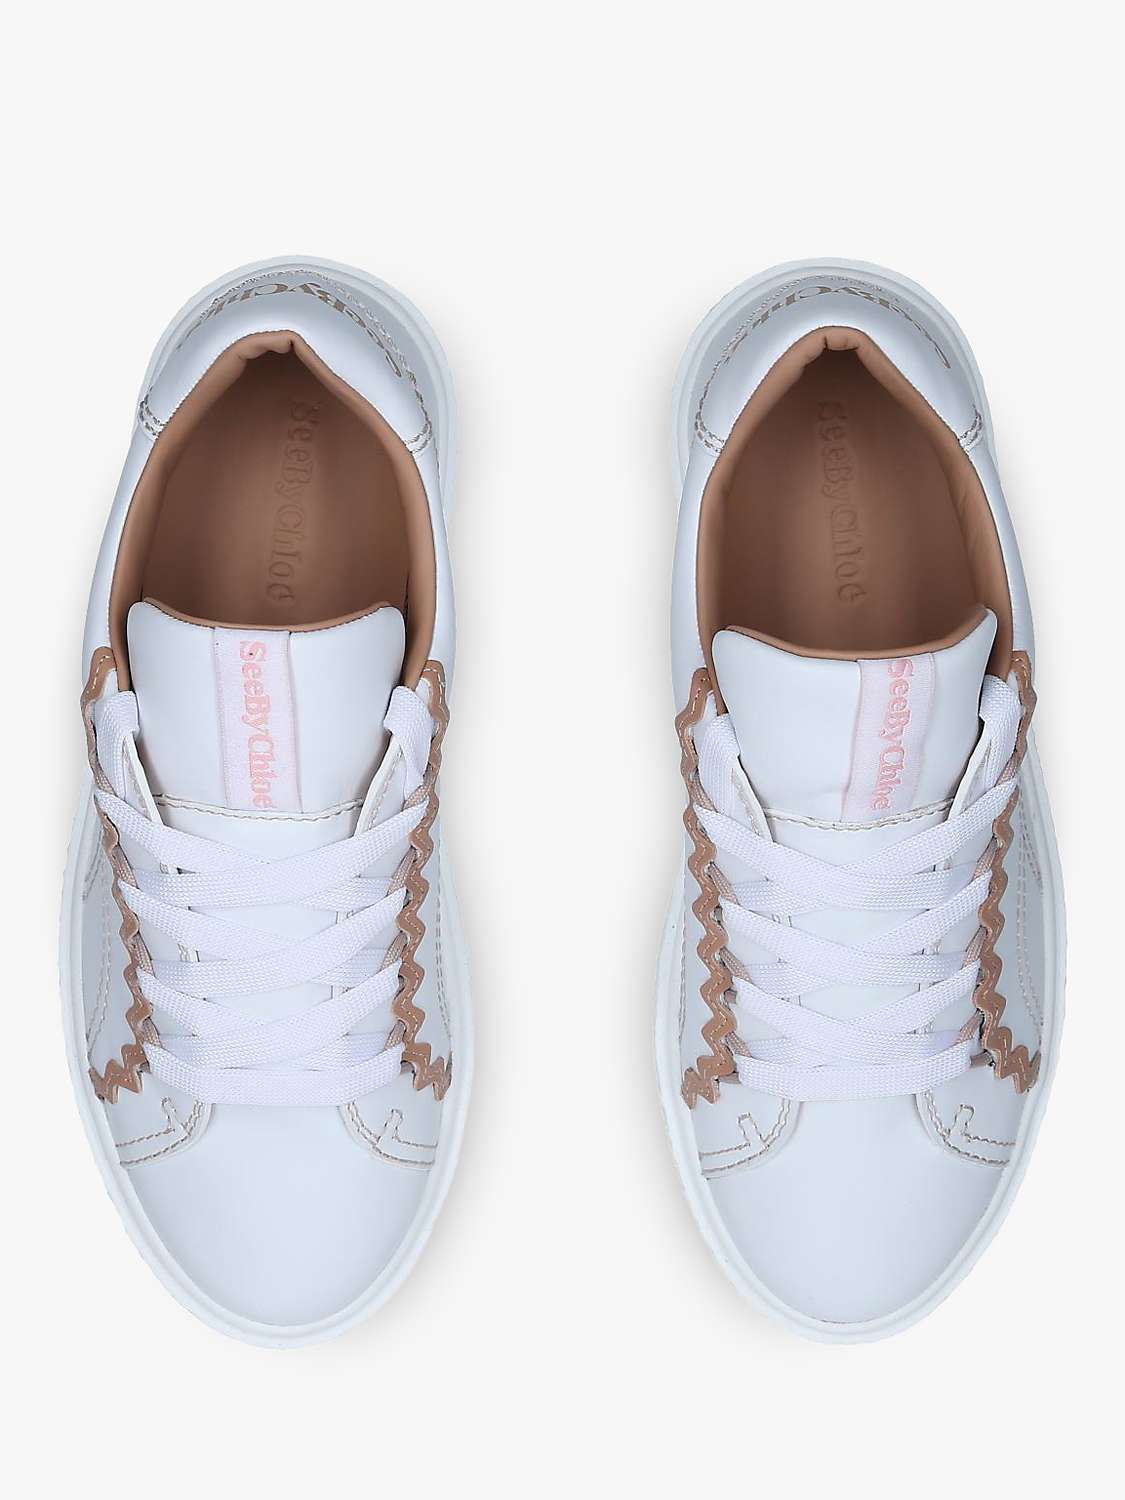 Buy See by Chloé Sevy Low Top Leather Trainers, White/Multi Online at johnlewis.com